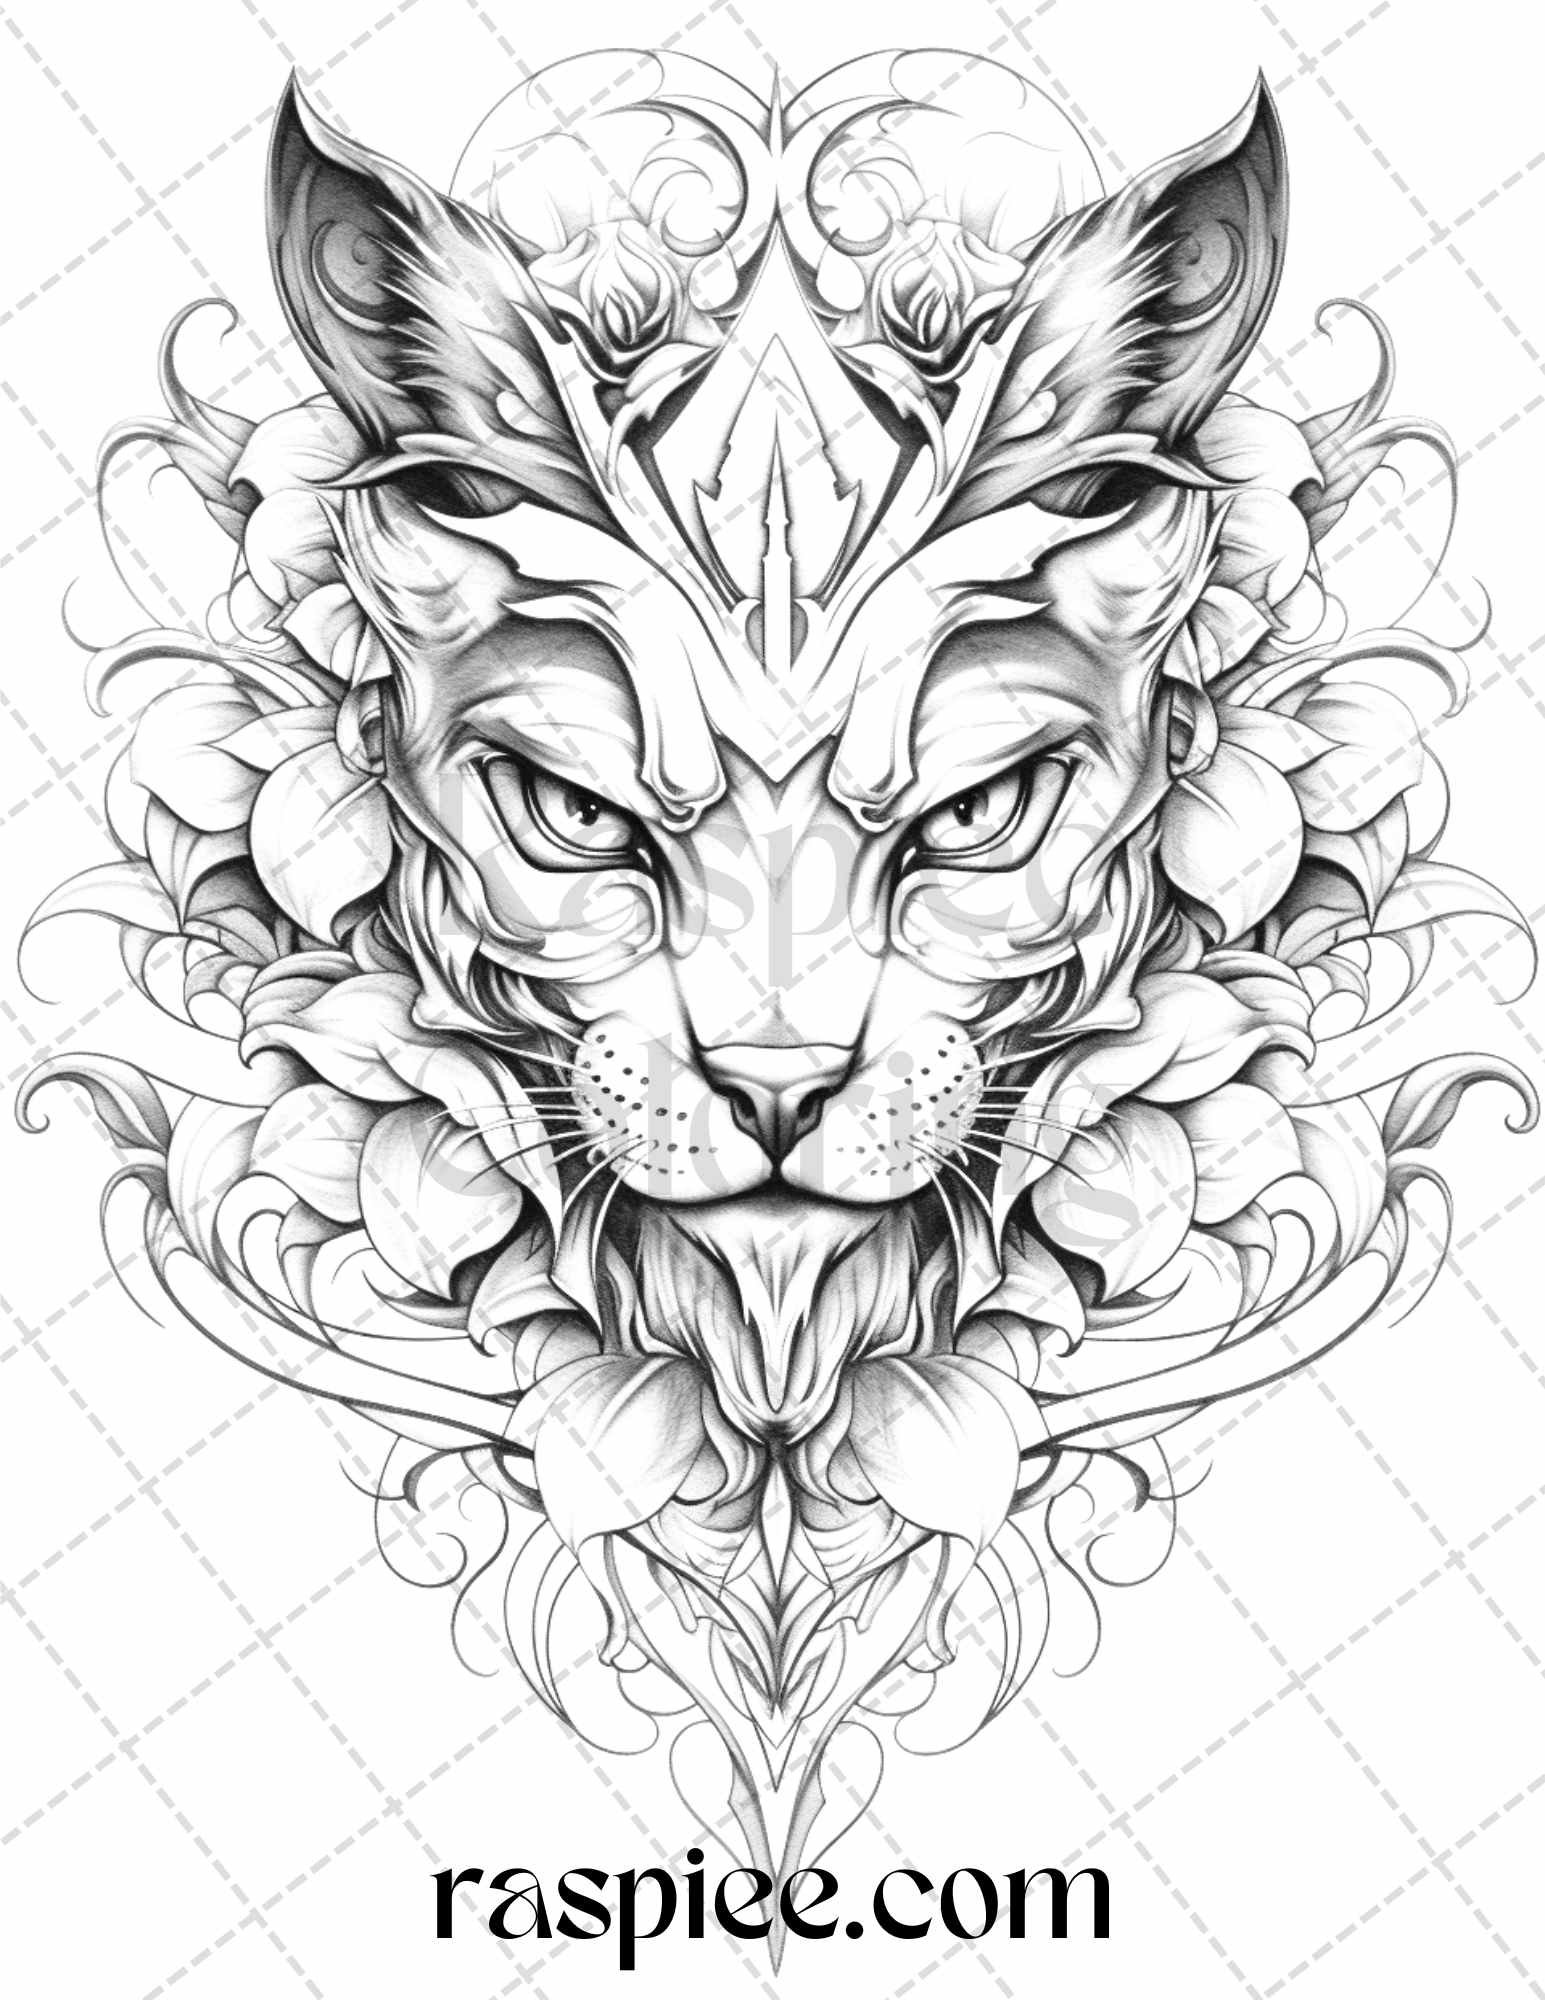 Art Therapy Printable Adult Coloring Book Downloadable PDF 20 Coloring  Pages for Adults With Bold Lines and Intricate Patterns 